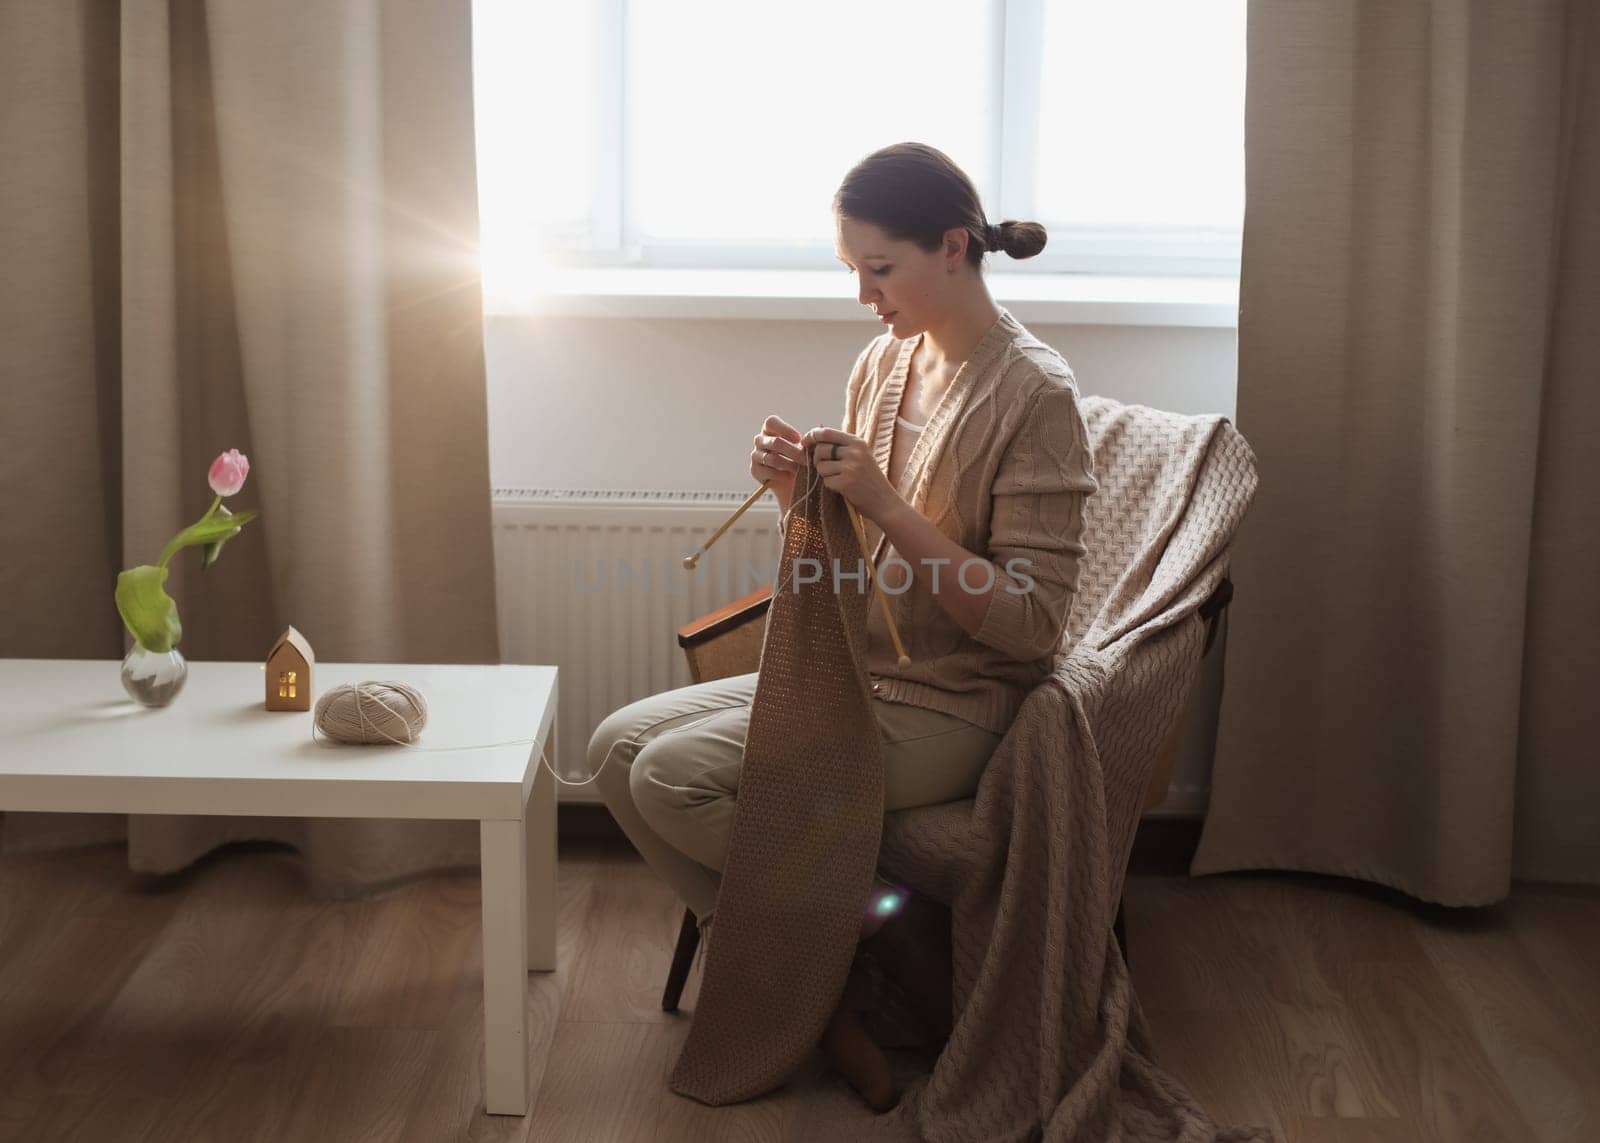 Girl knitting at home.Handmade zero waste,upcycling, small business employment opportunity concept.Hobby knitting and needlework for mental health. Cozy room interior by paralisart